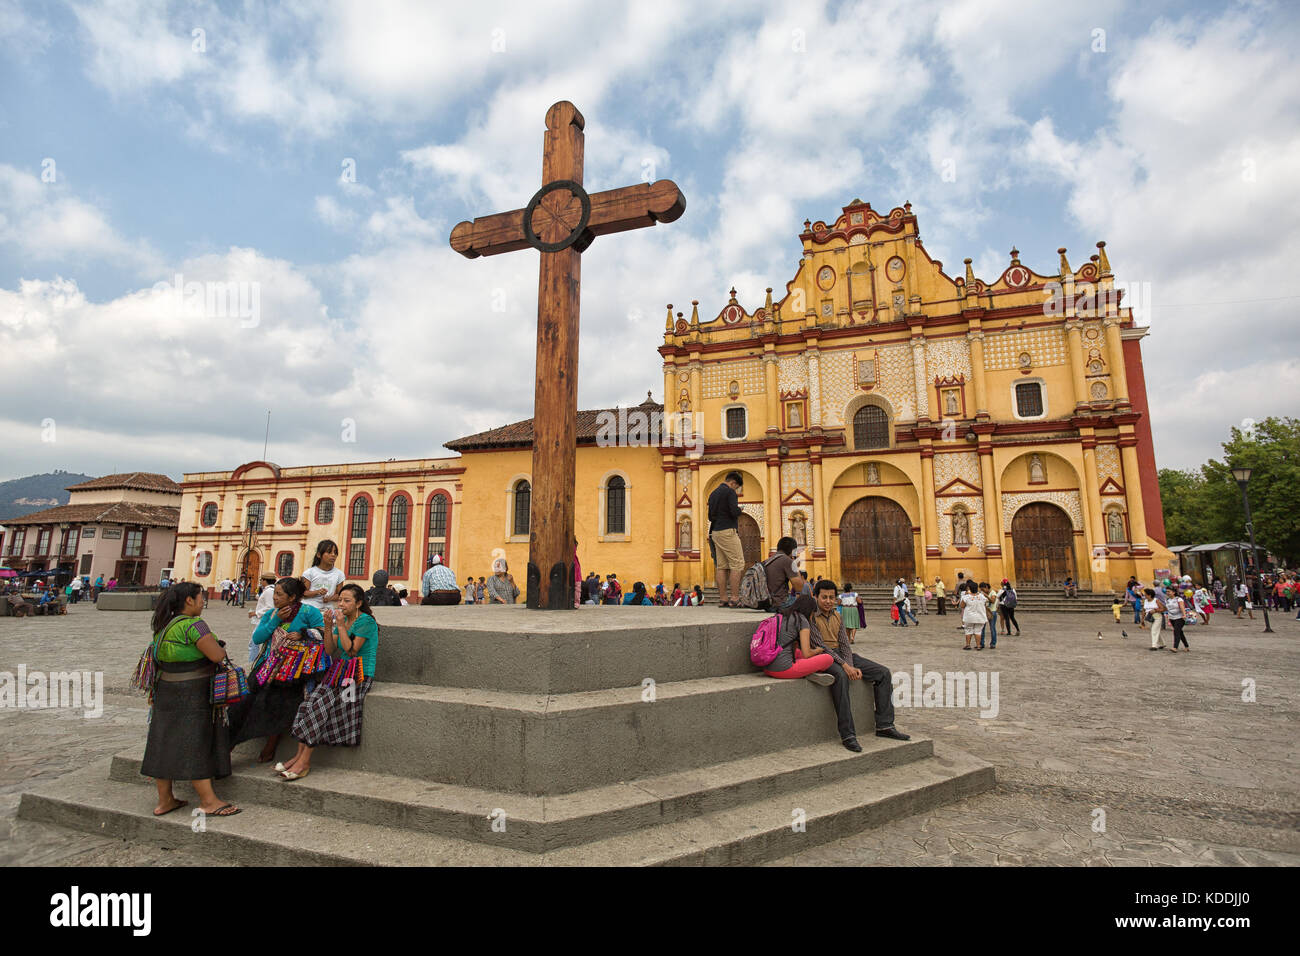 April 14, 2014 San Cristobal de las Casas, Mexico: 'Plaza de la Paz' in front of San Cristobal cathedral is a popular place with locals and tourists a Stock Photo